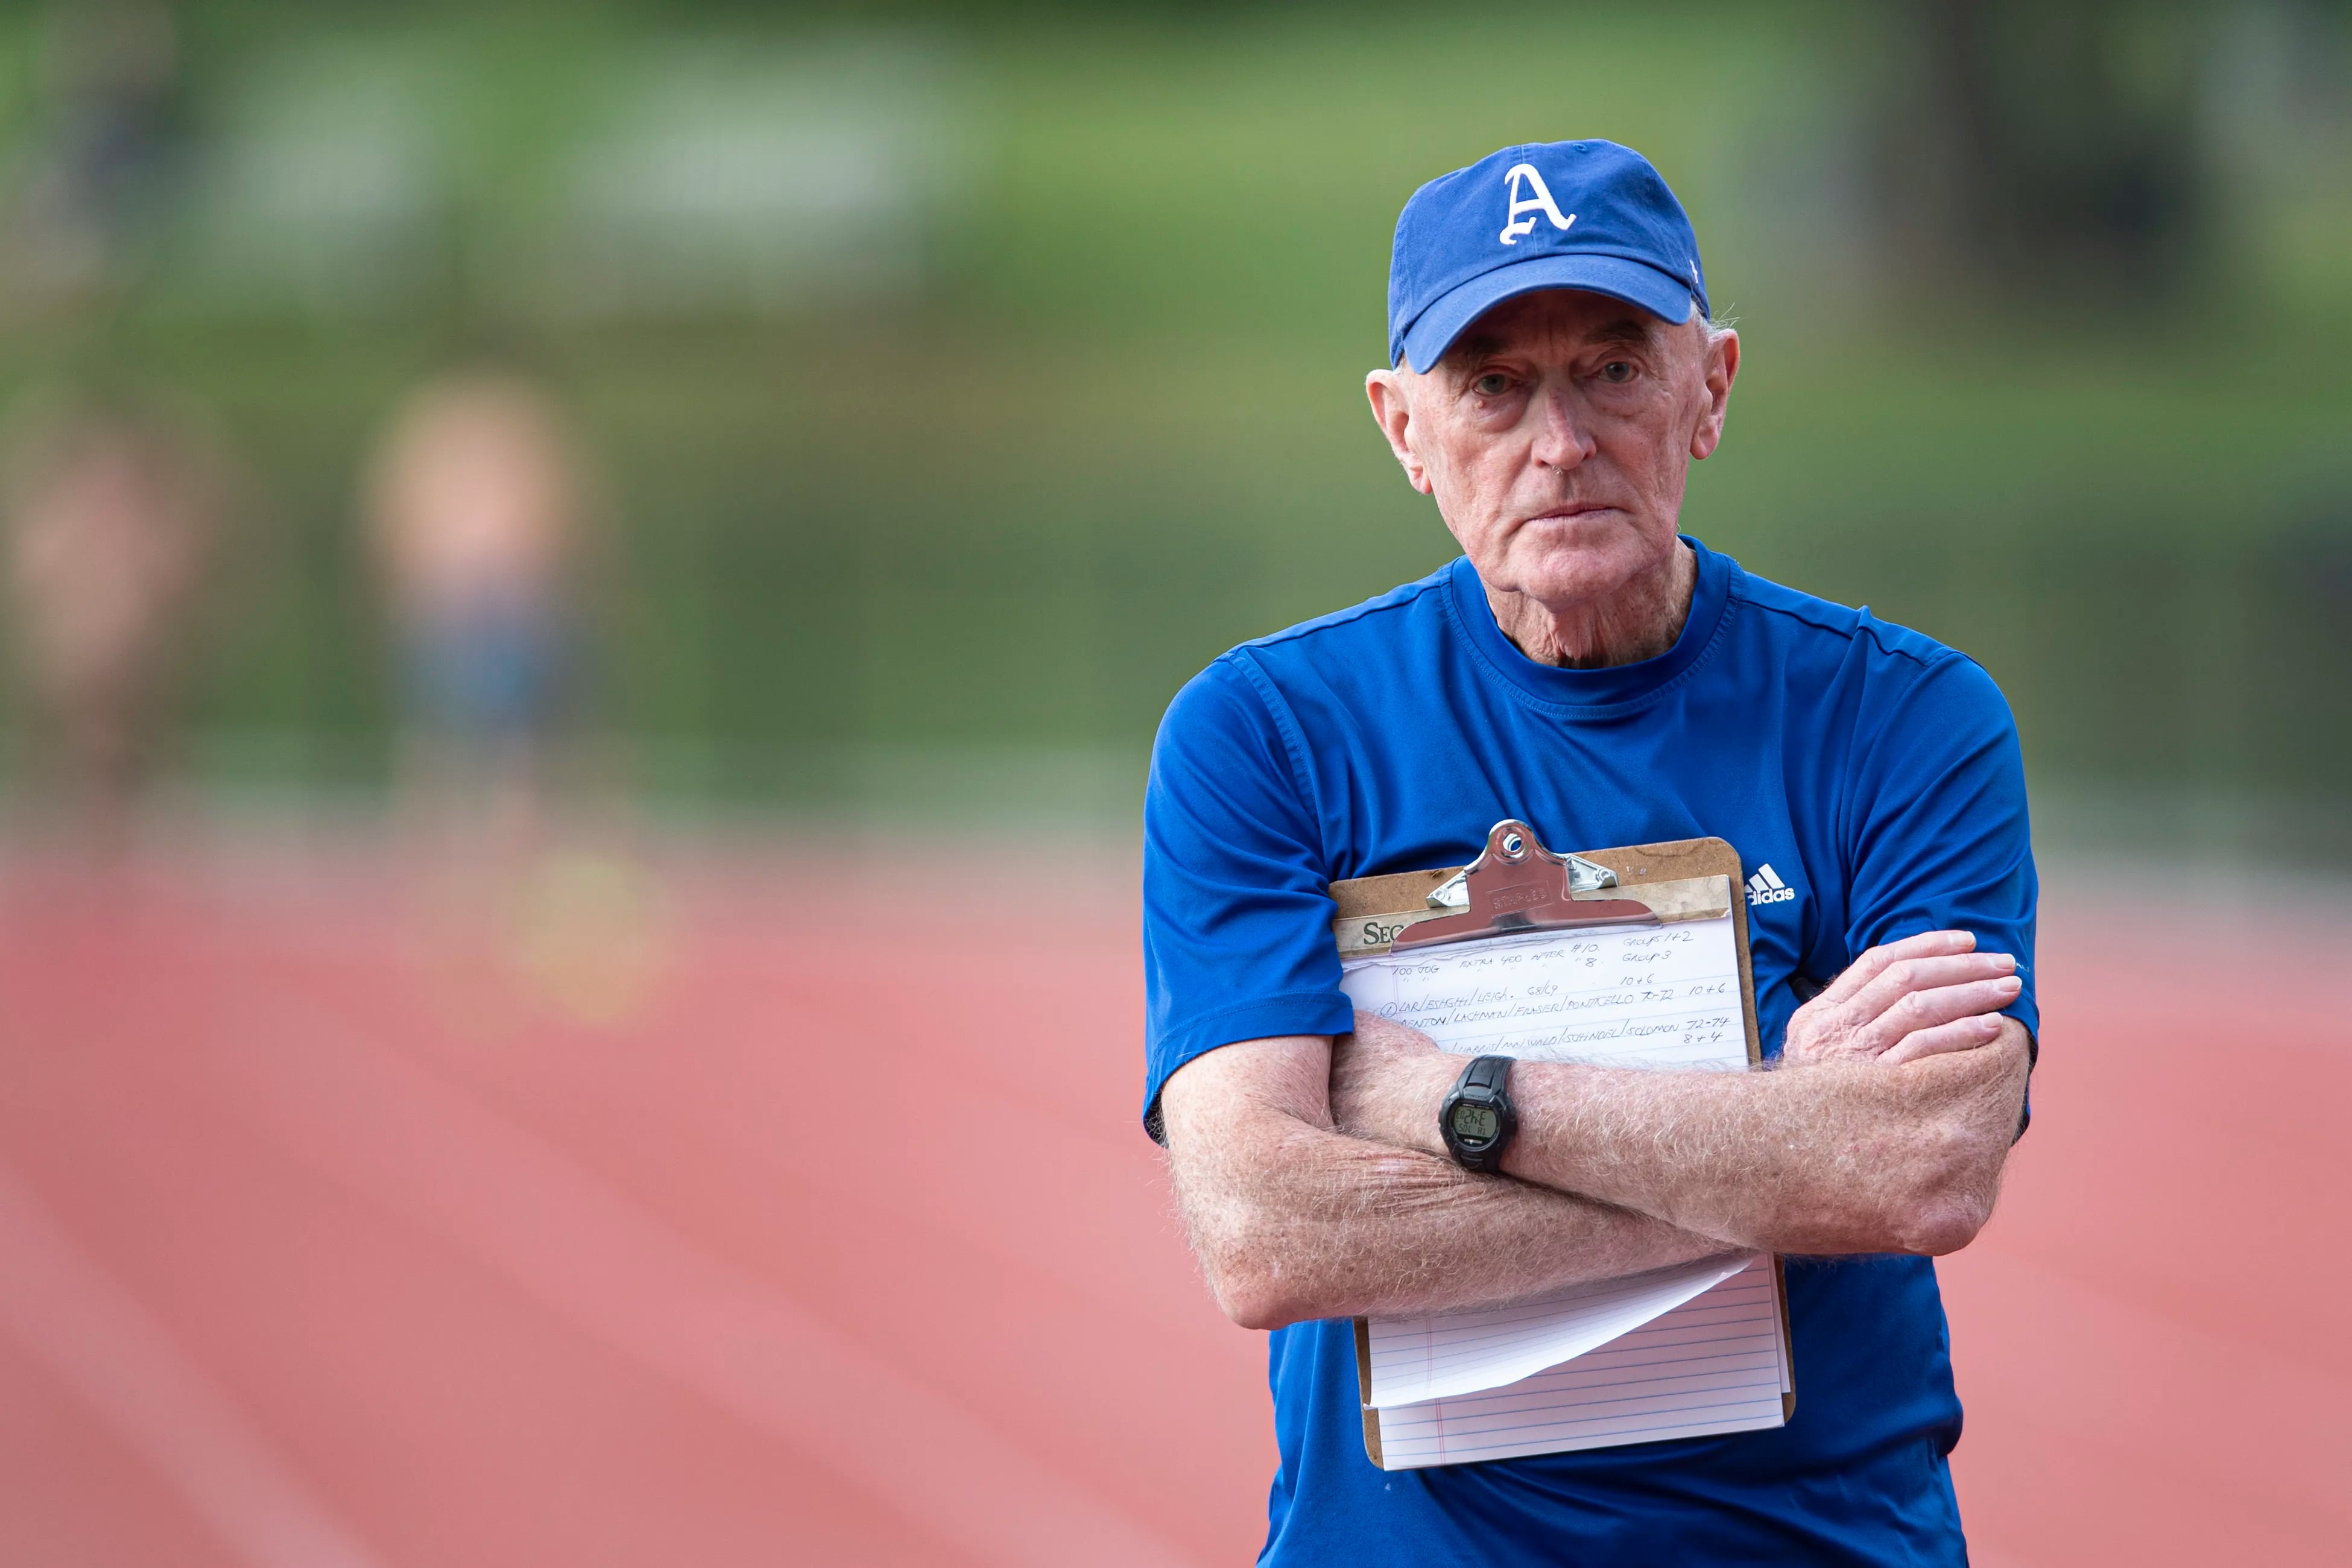 Haverford College track and cross-country coach Tom Donnelly  had 29 NCAA champions.

